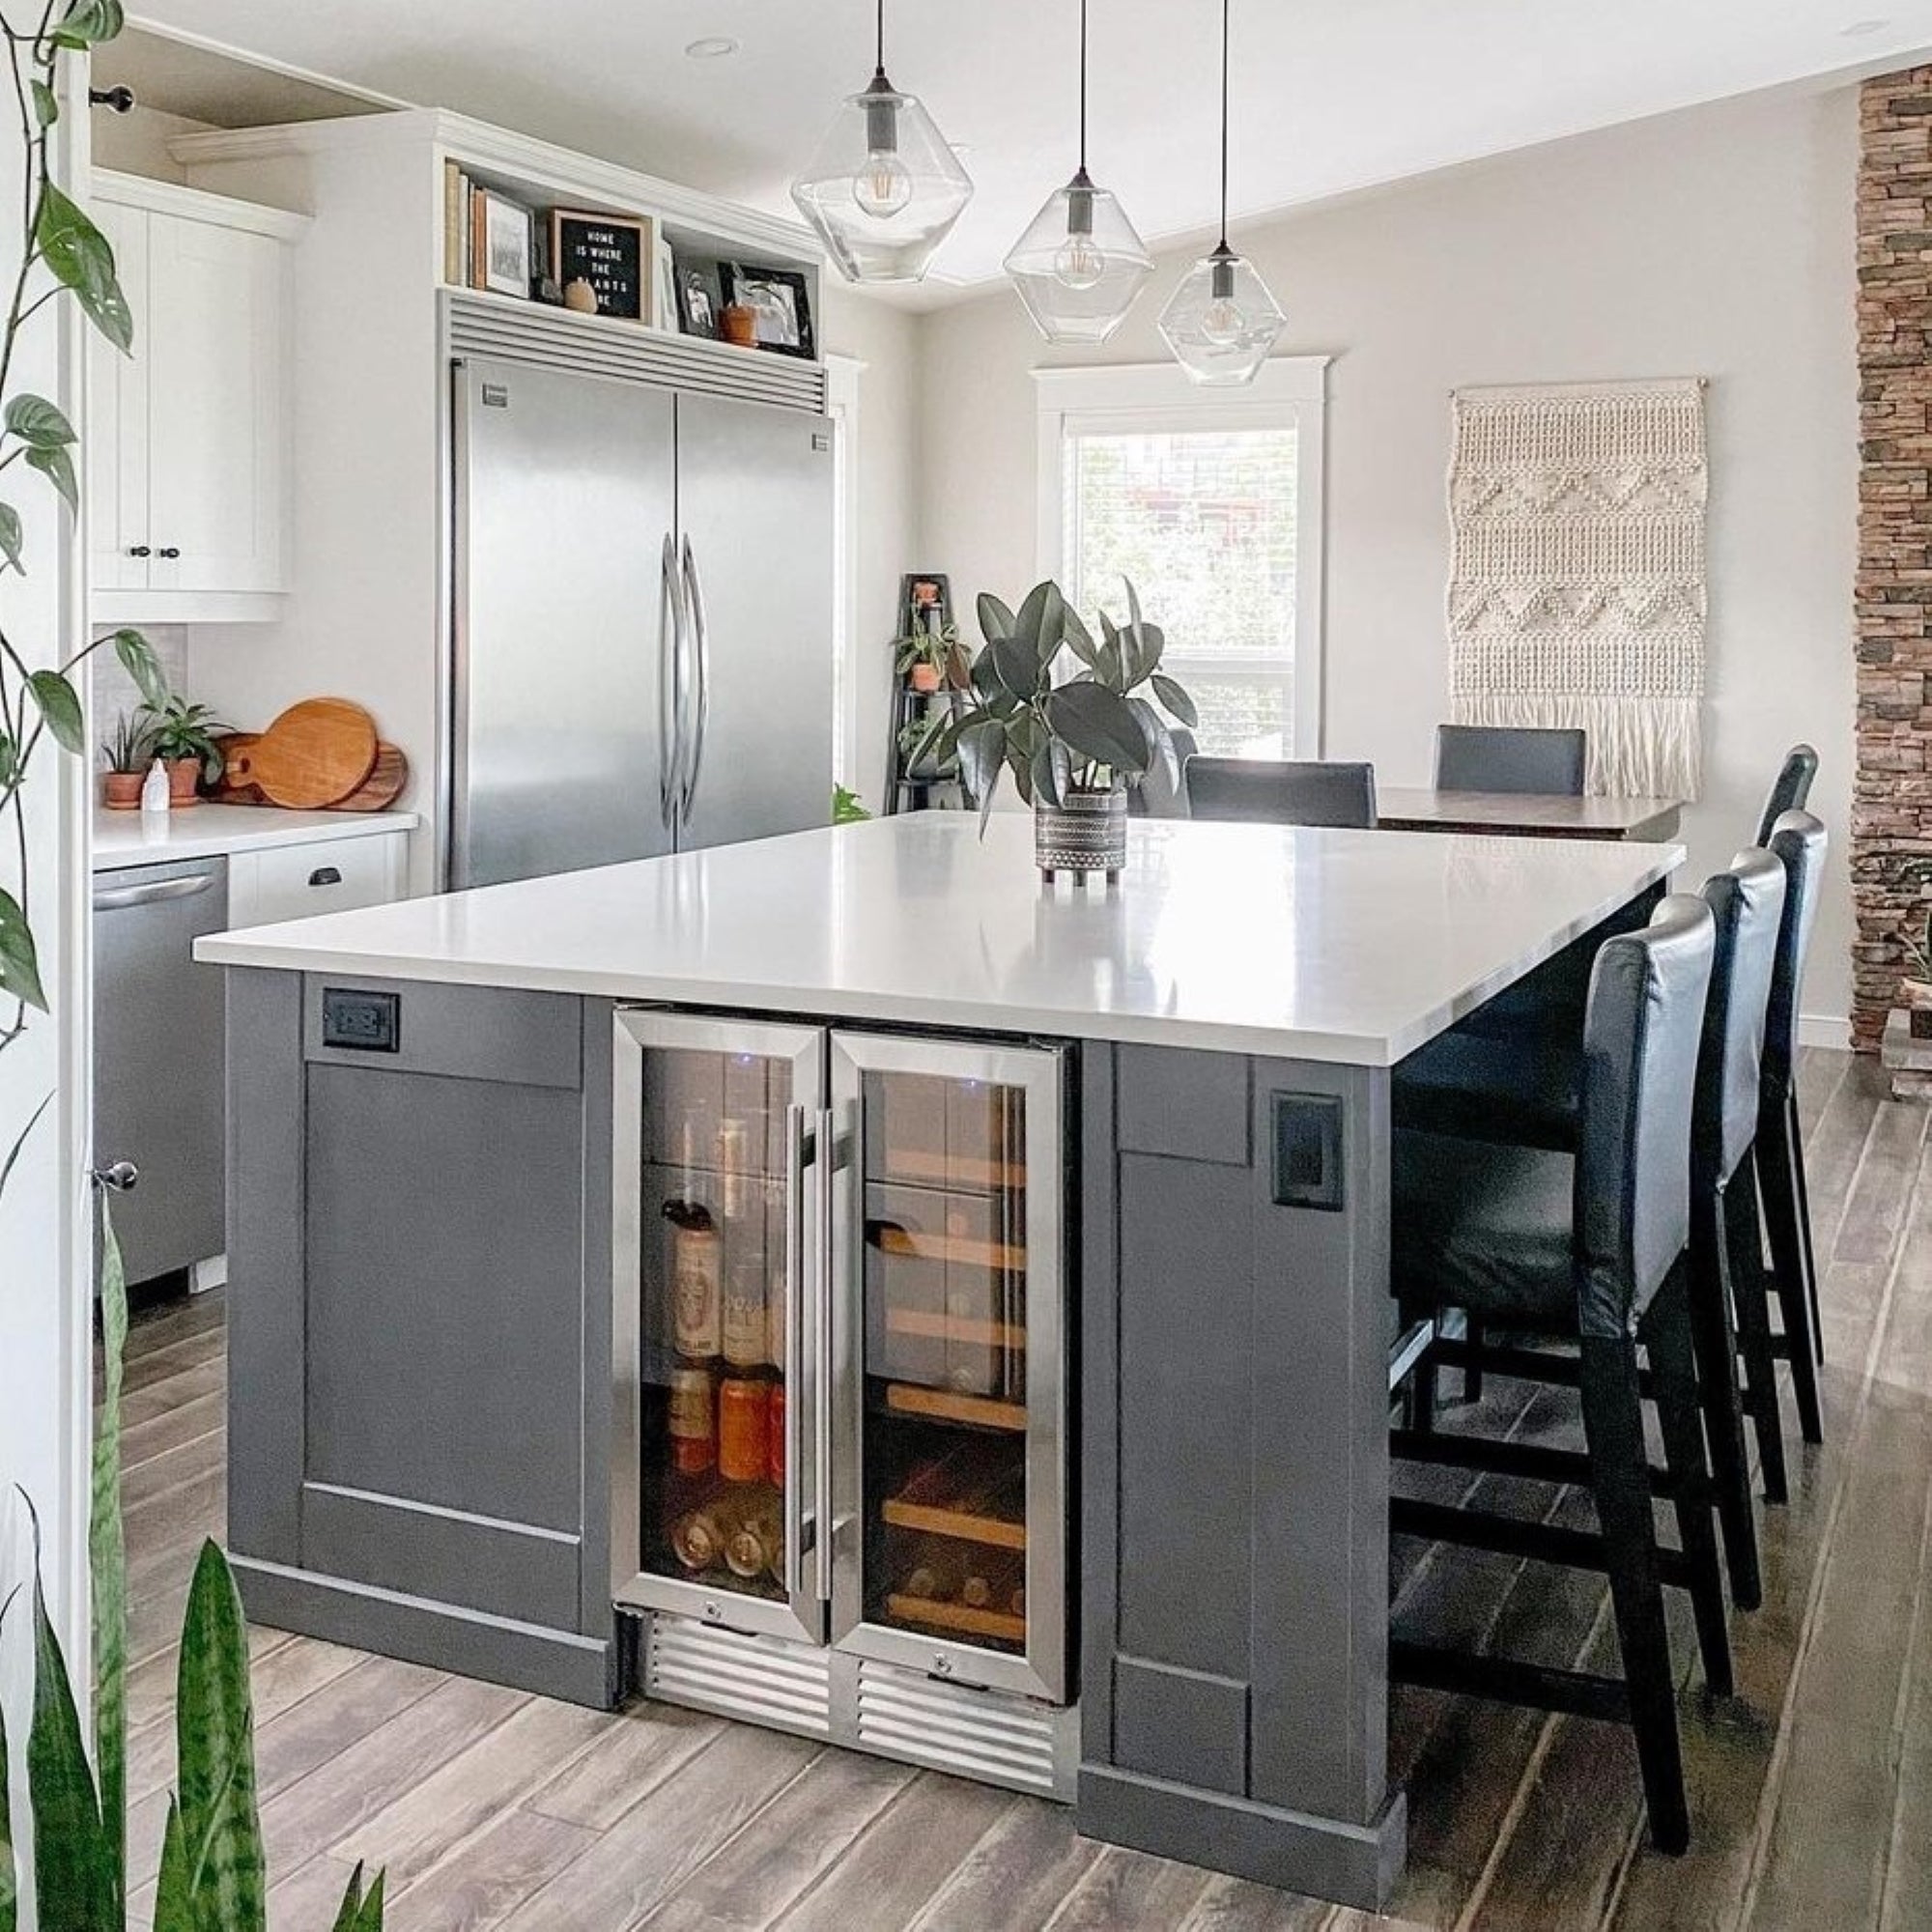 Koolatron dual zone front-venting compressor wine and beer fridge installed in a dark gray kitchen island with a white countertop and four black bar height chairs. There are pendant lamps above and white cupboards and stainless steel appliances in the background